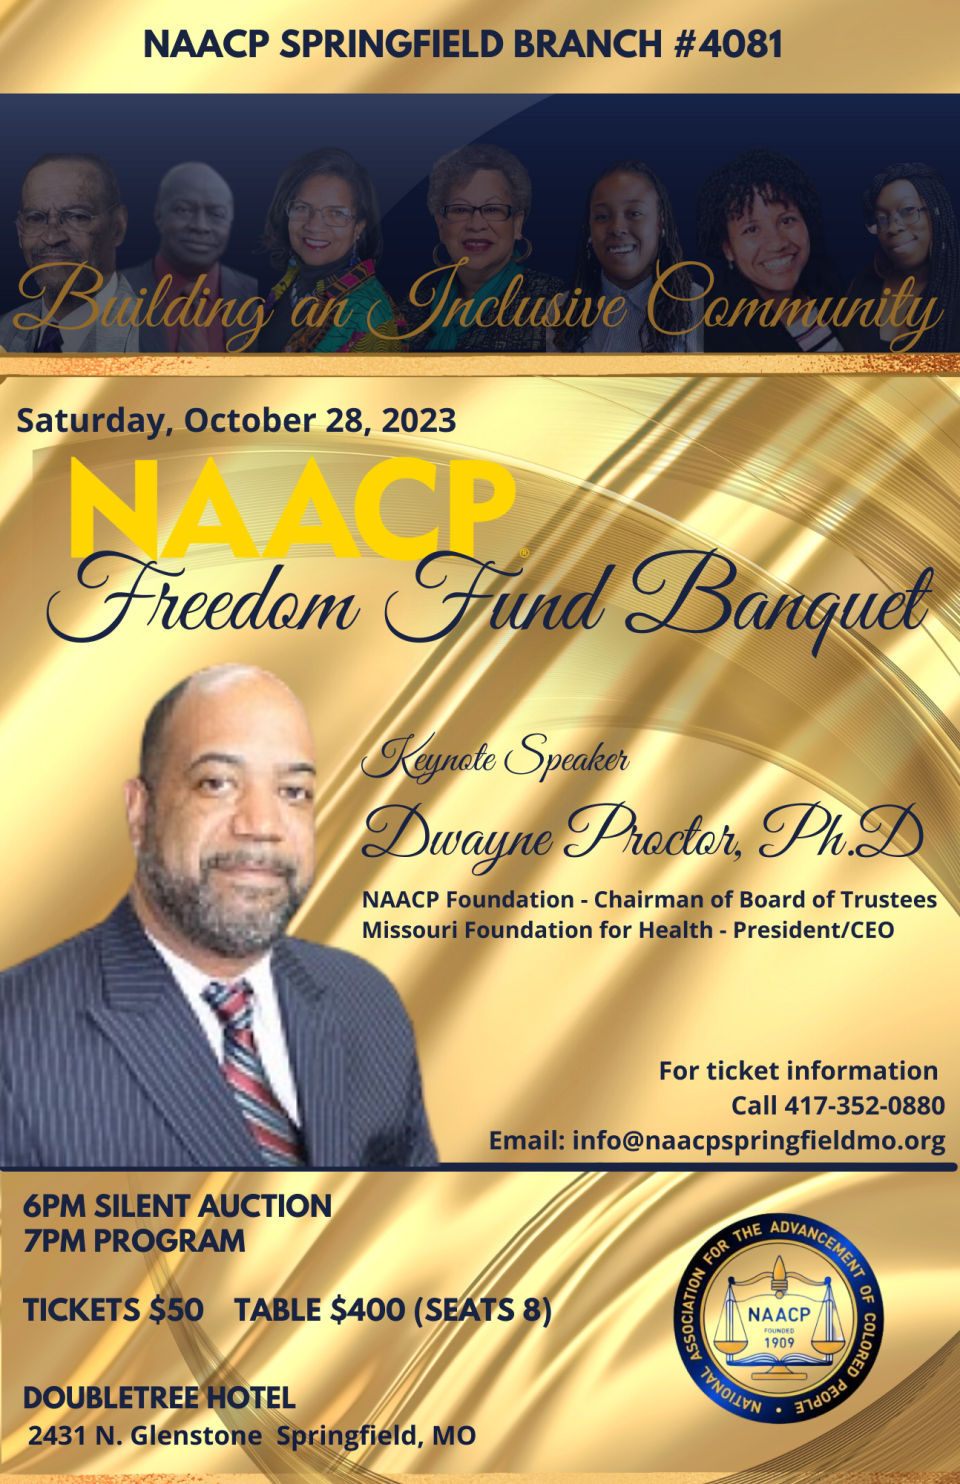 The Springfield NAACP's Freedom Fund Banquet is Saturday, Oct. 28 at 6 p.m. The keynote speaker is Dwayne Proctor, the Board of Trustees Chairman for the NAACP Foundation and President and CEO of the Missouri Foundation for Health.